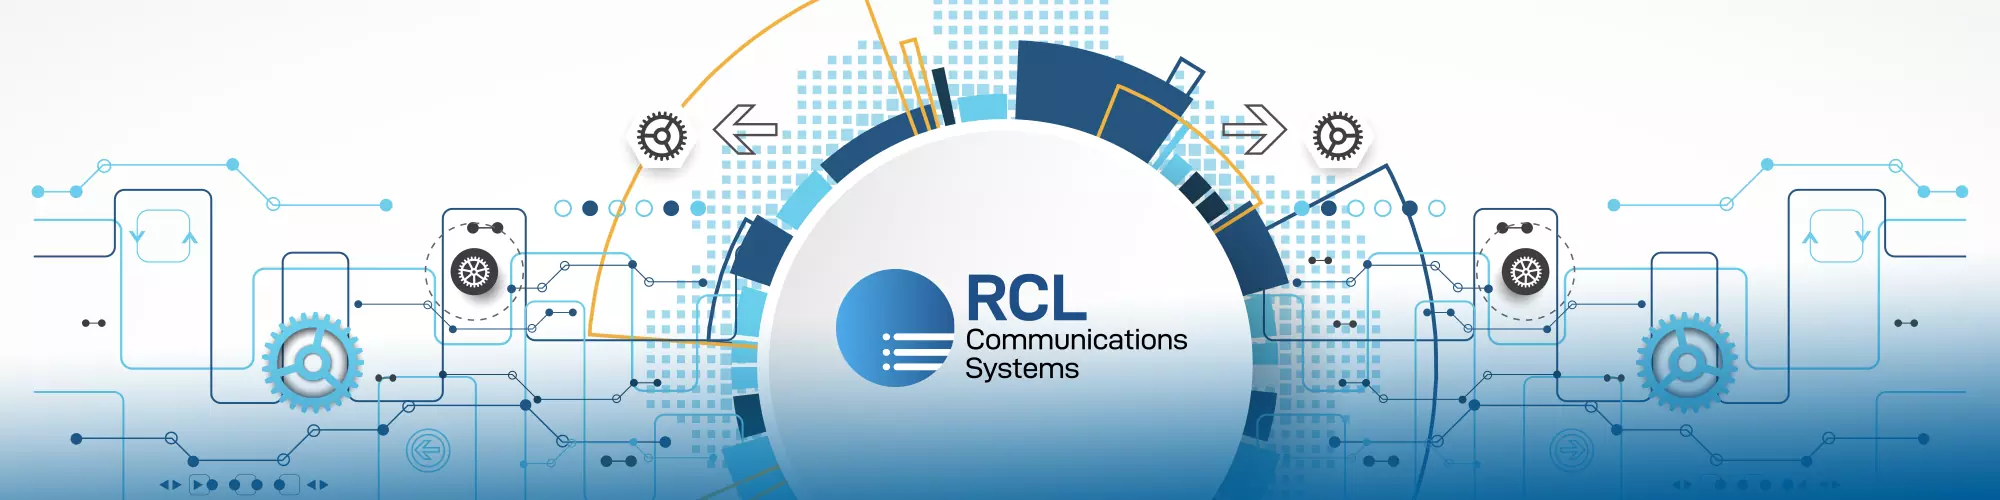 About RCL Communications